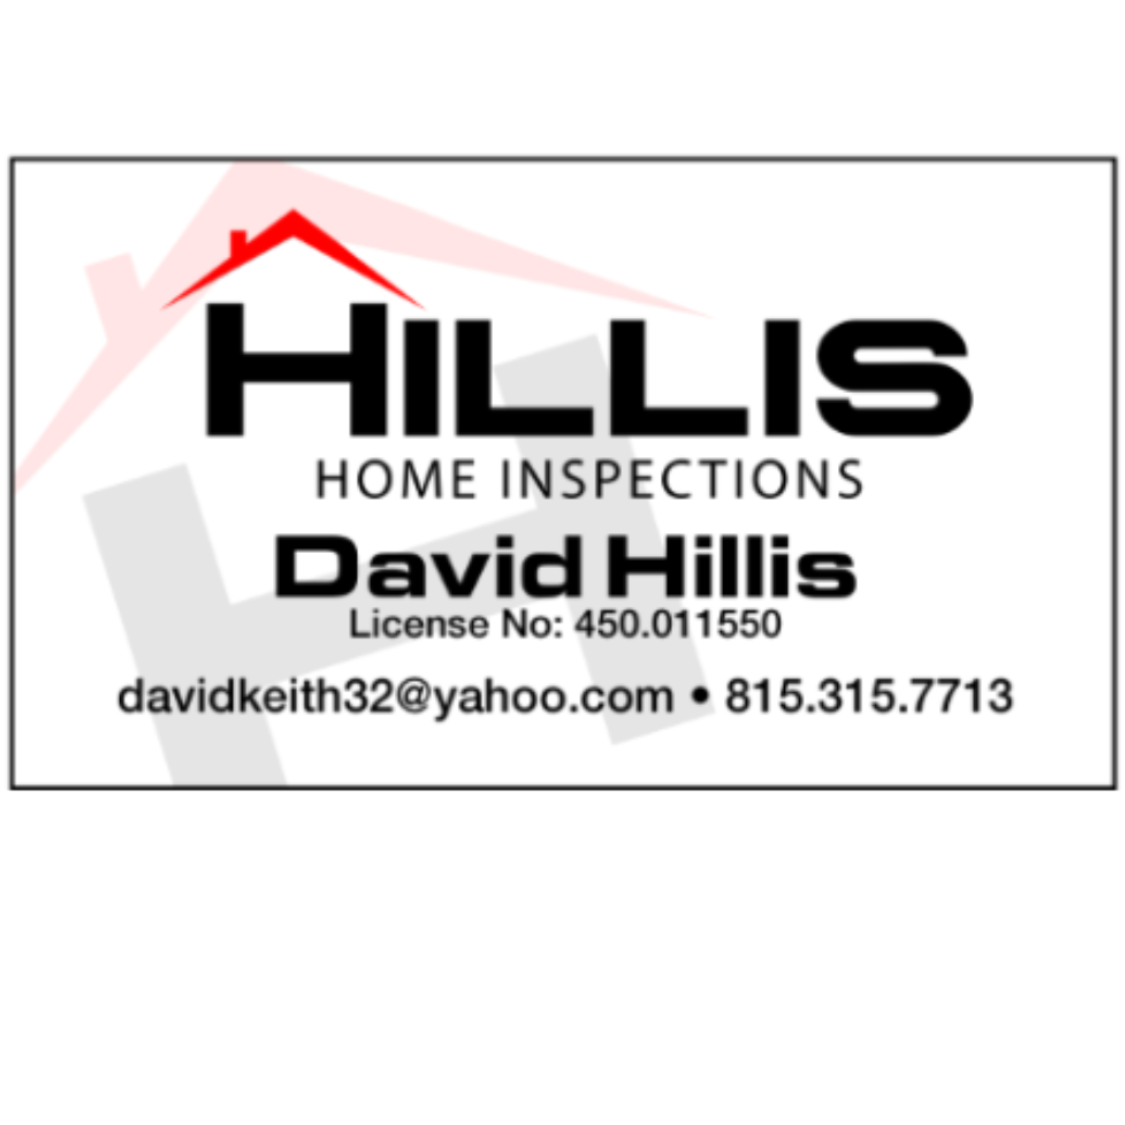 Hillis Home Inspection 4198 Countryview Dr, Byron Illinois 61010